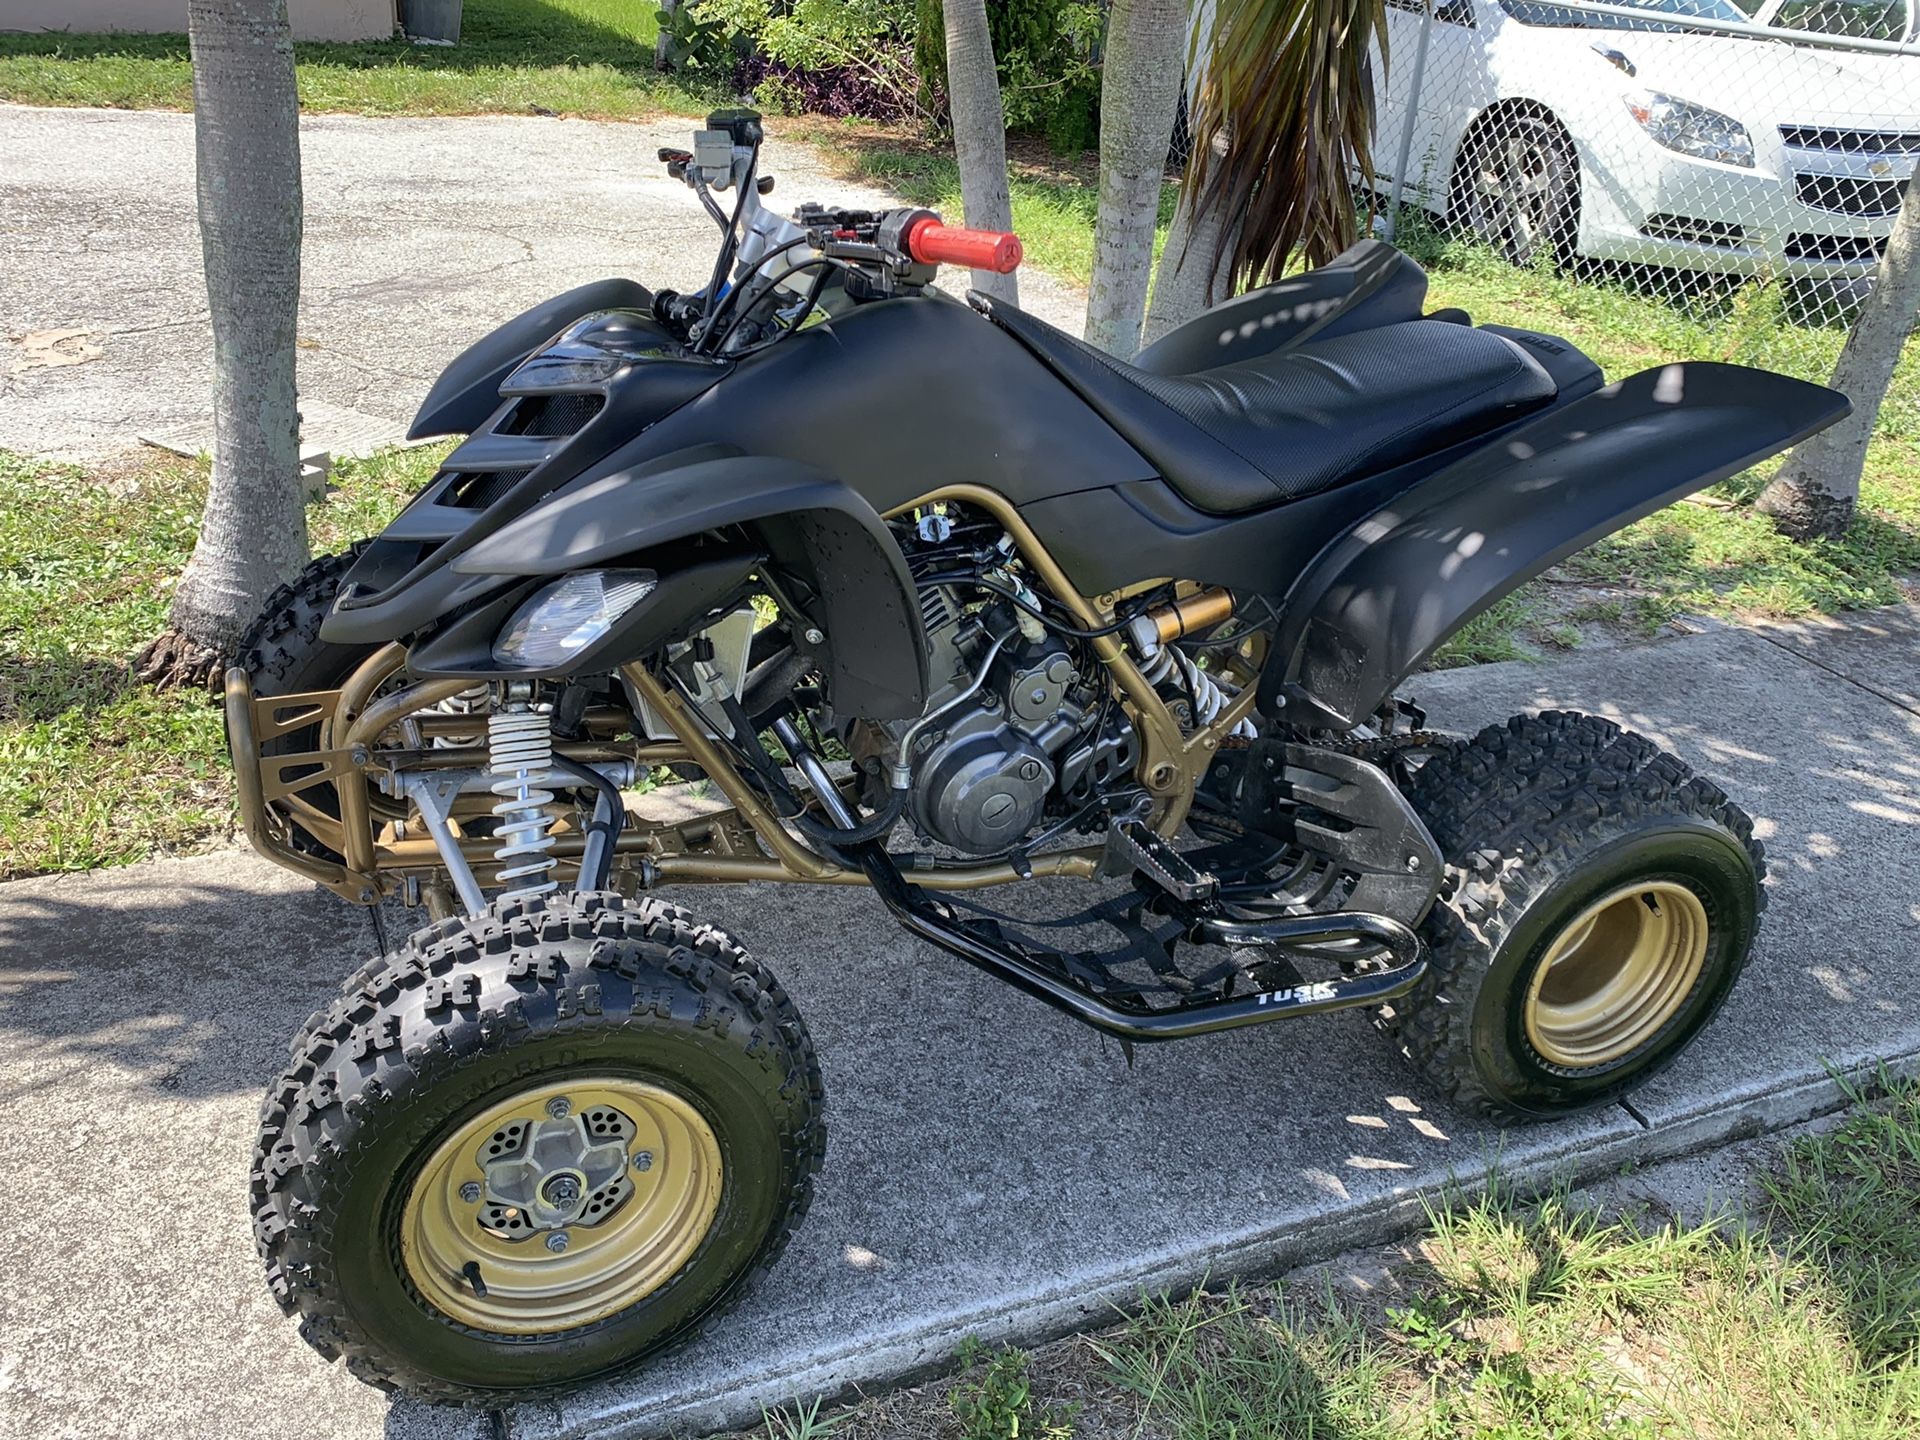 Raptor 660 R with Title in Hand